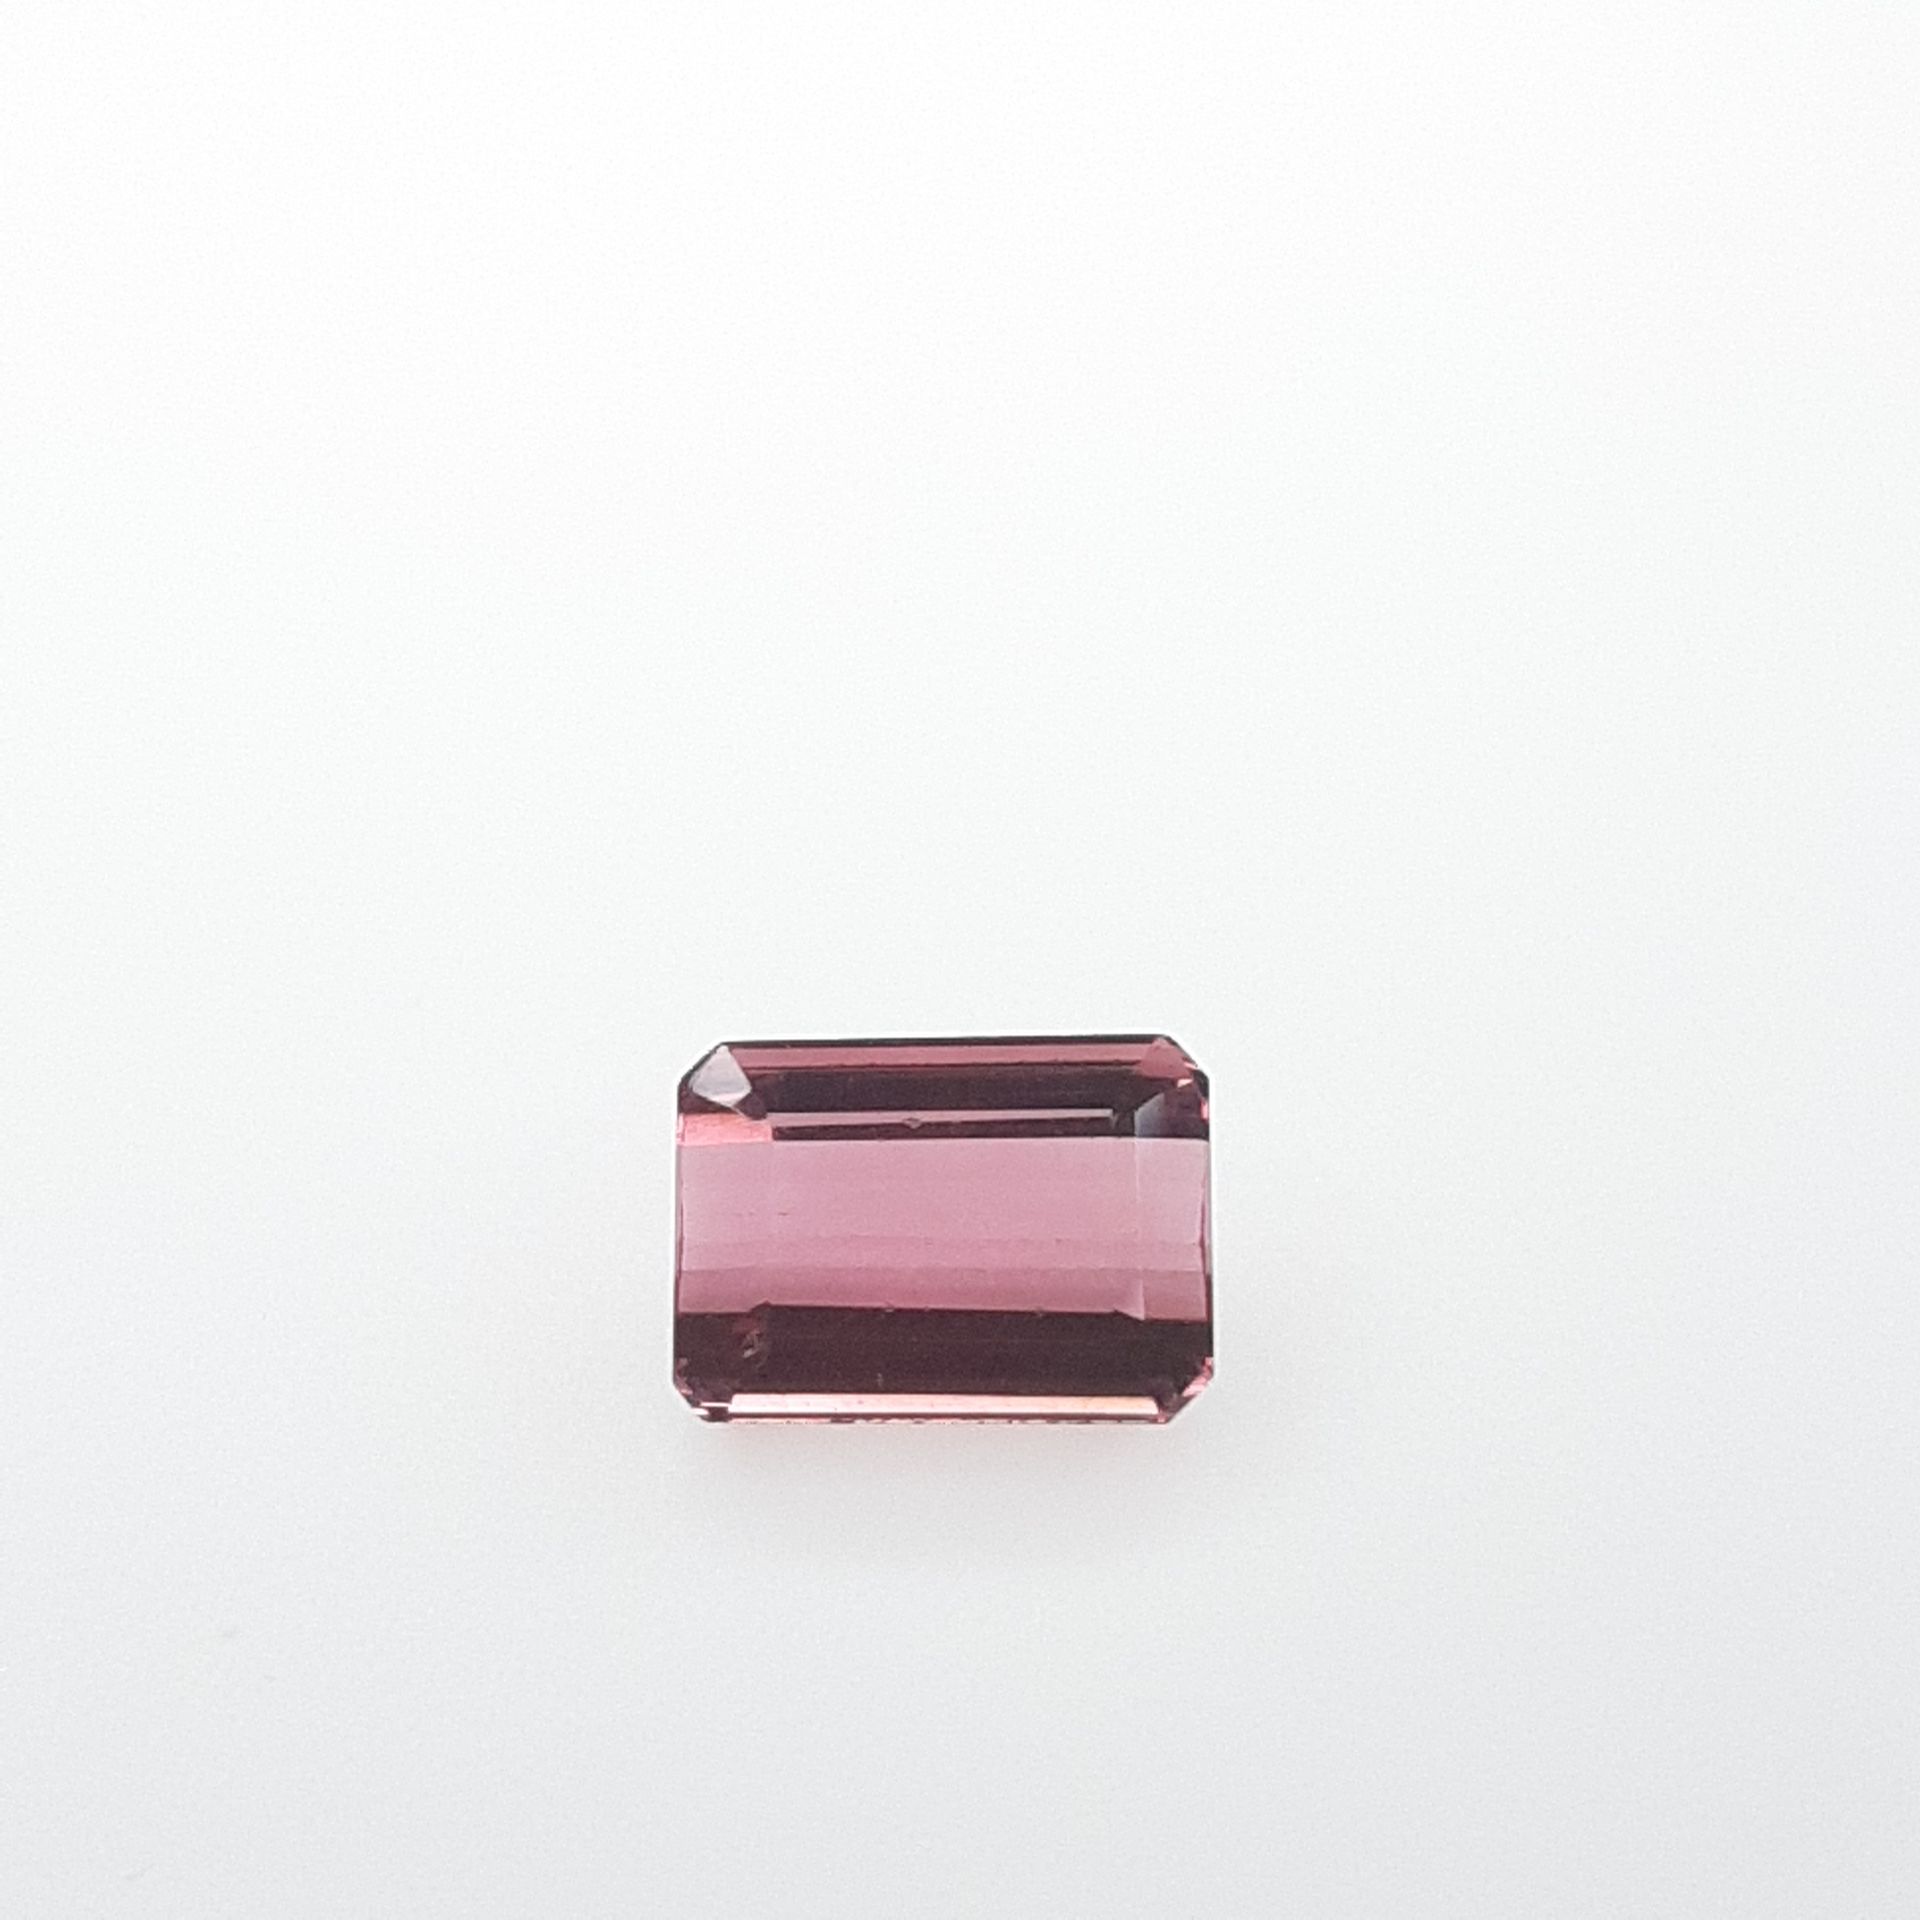 Rubellite - BRESIL - 3.95 cts RUBELLITE - From Brazil - Reddish pink color - Rec&hellip;